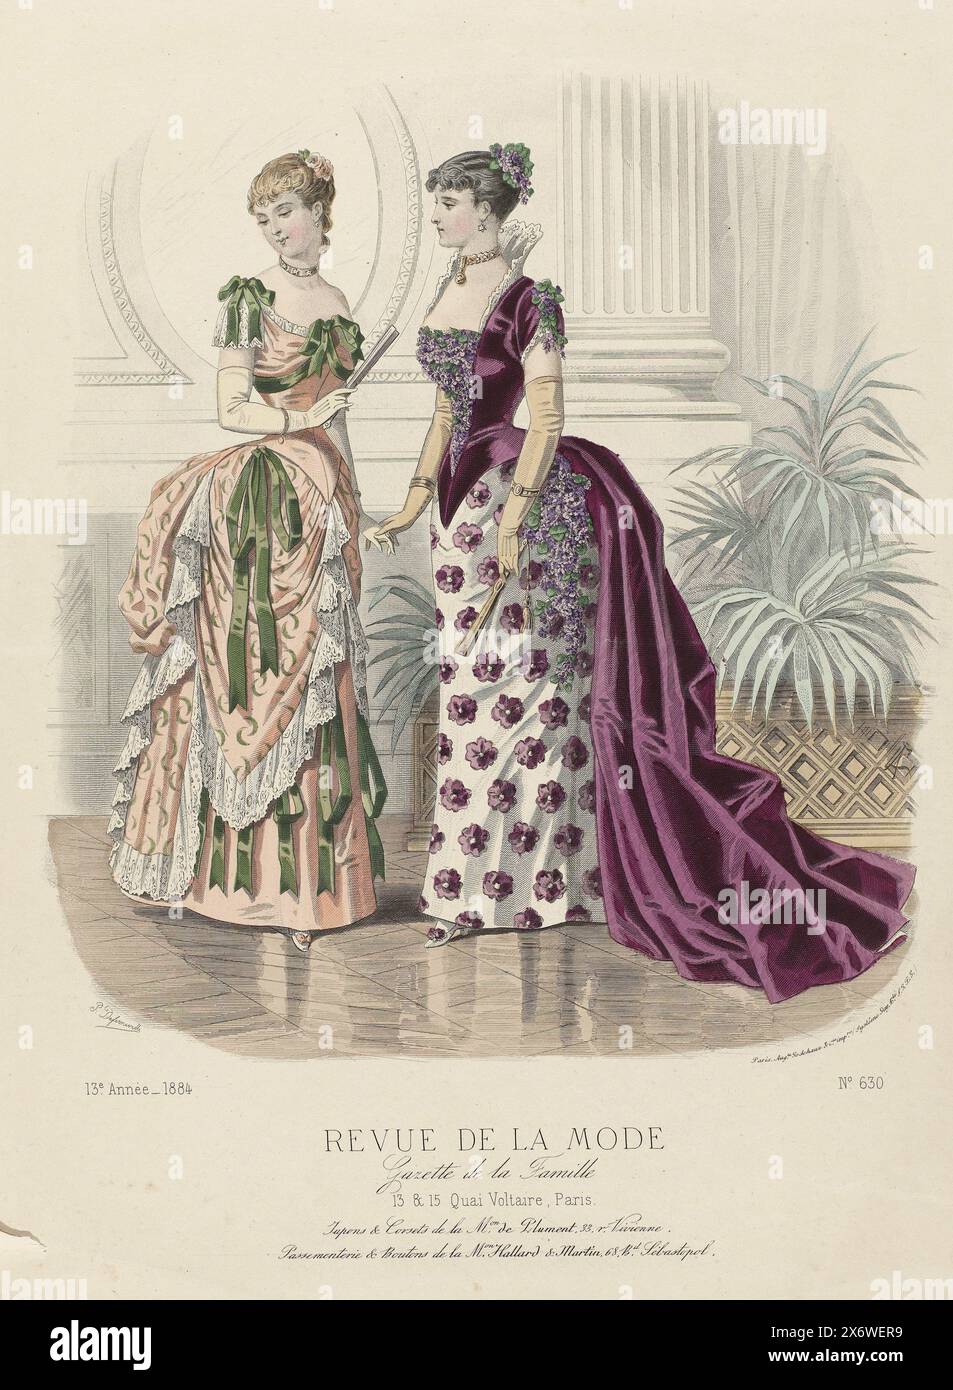 Revue de la Mode, Gazette de la Famille, 24 Janvier 1884, 13e annee, No. 630: Jupons & Corsets (...), Two women in an interior. Left: Dress of plain light pink silk and 'brocatelle' decorated with white lace and green ribbons. Long gloves made of light suede. Right: dress of white brocaded satin and wine red (claret) velvet or satin decorated with purple flowers. Below the performance are some lines of advertising text for various products. Print from the fashion magazine Revue de la Mode (1872-1913). Detailed description of the clothing on page 27 'PLANCHE COLORIÉE'., print maker: A Stock Photo